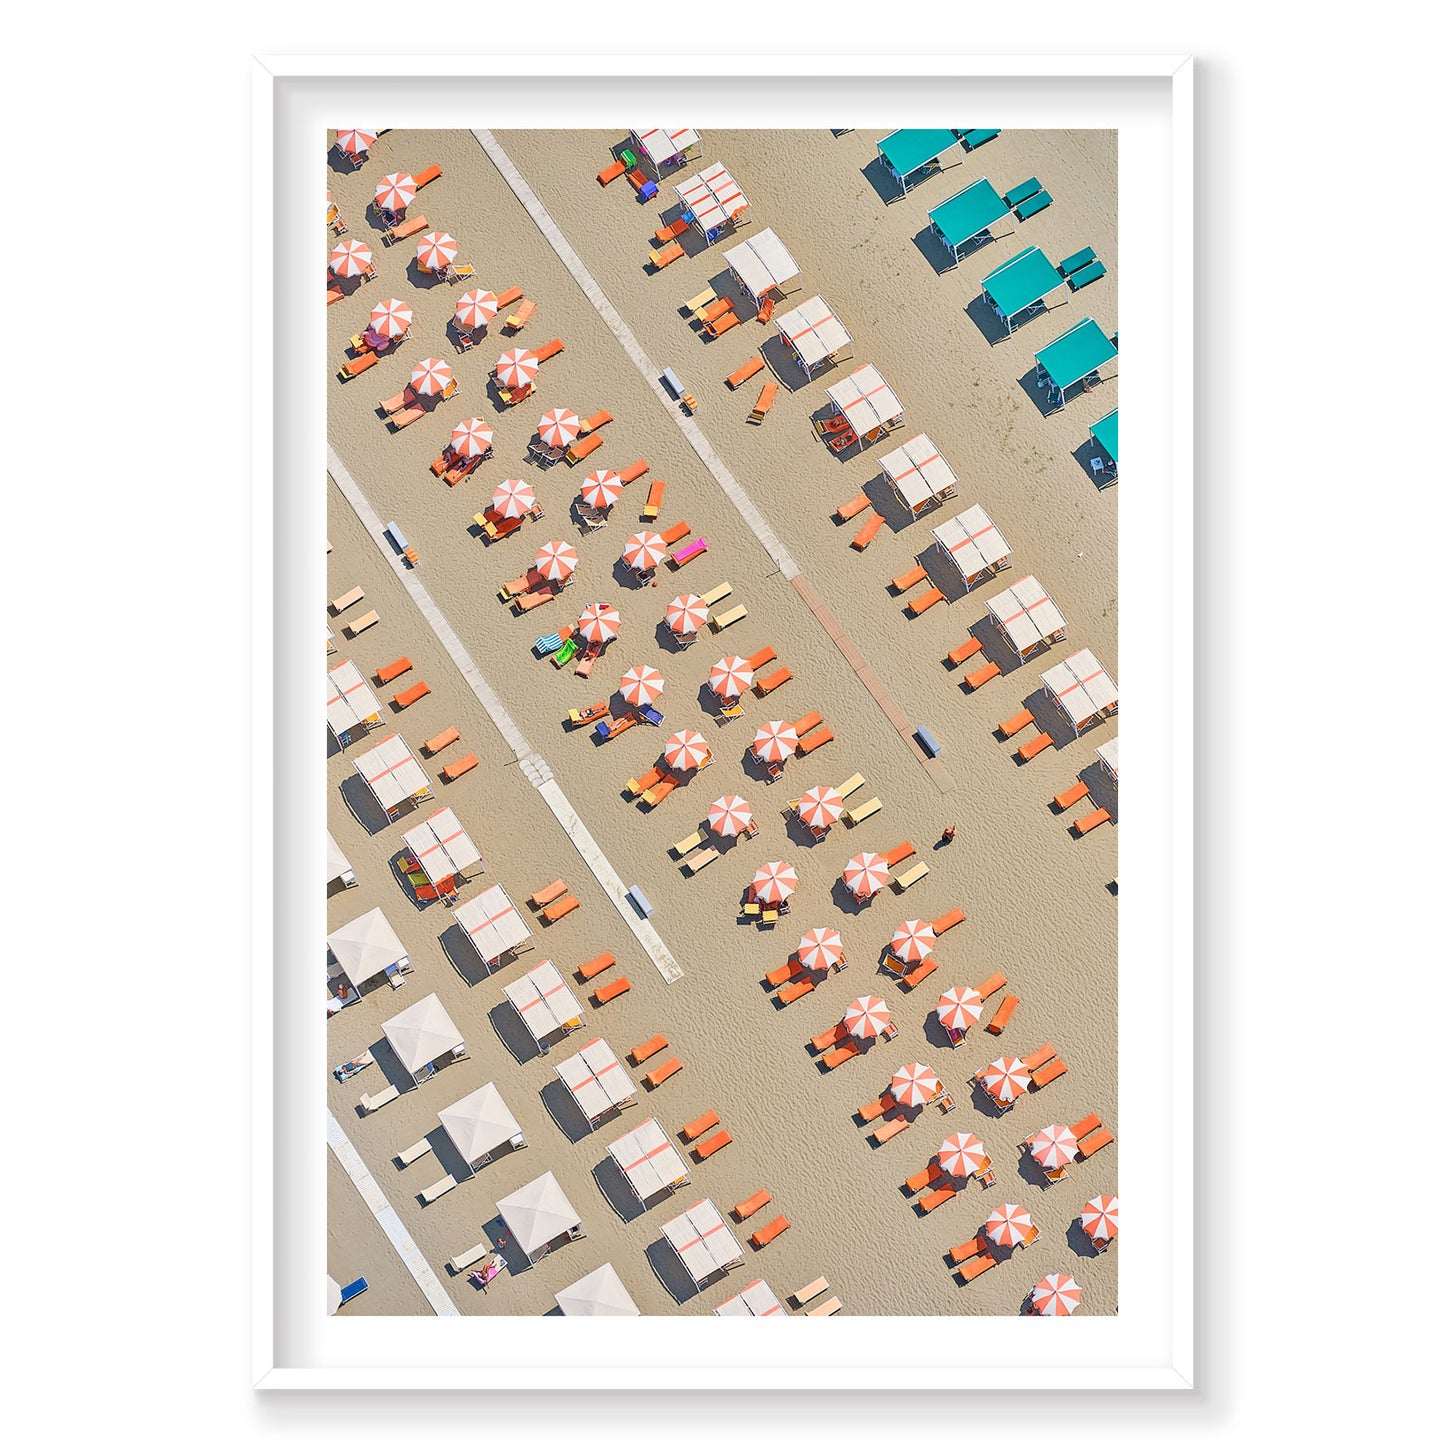 Orange Lounge Chairs, Italy, Vertical Print